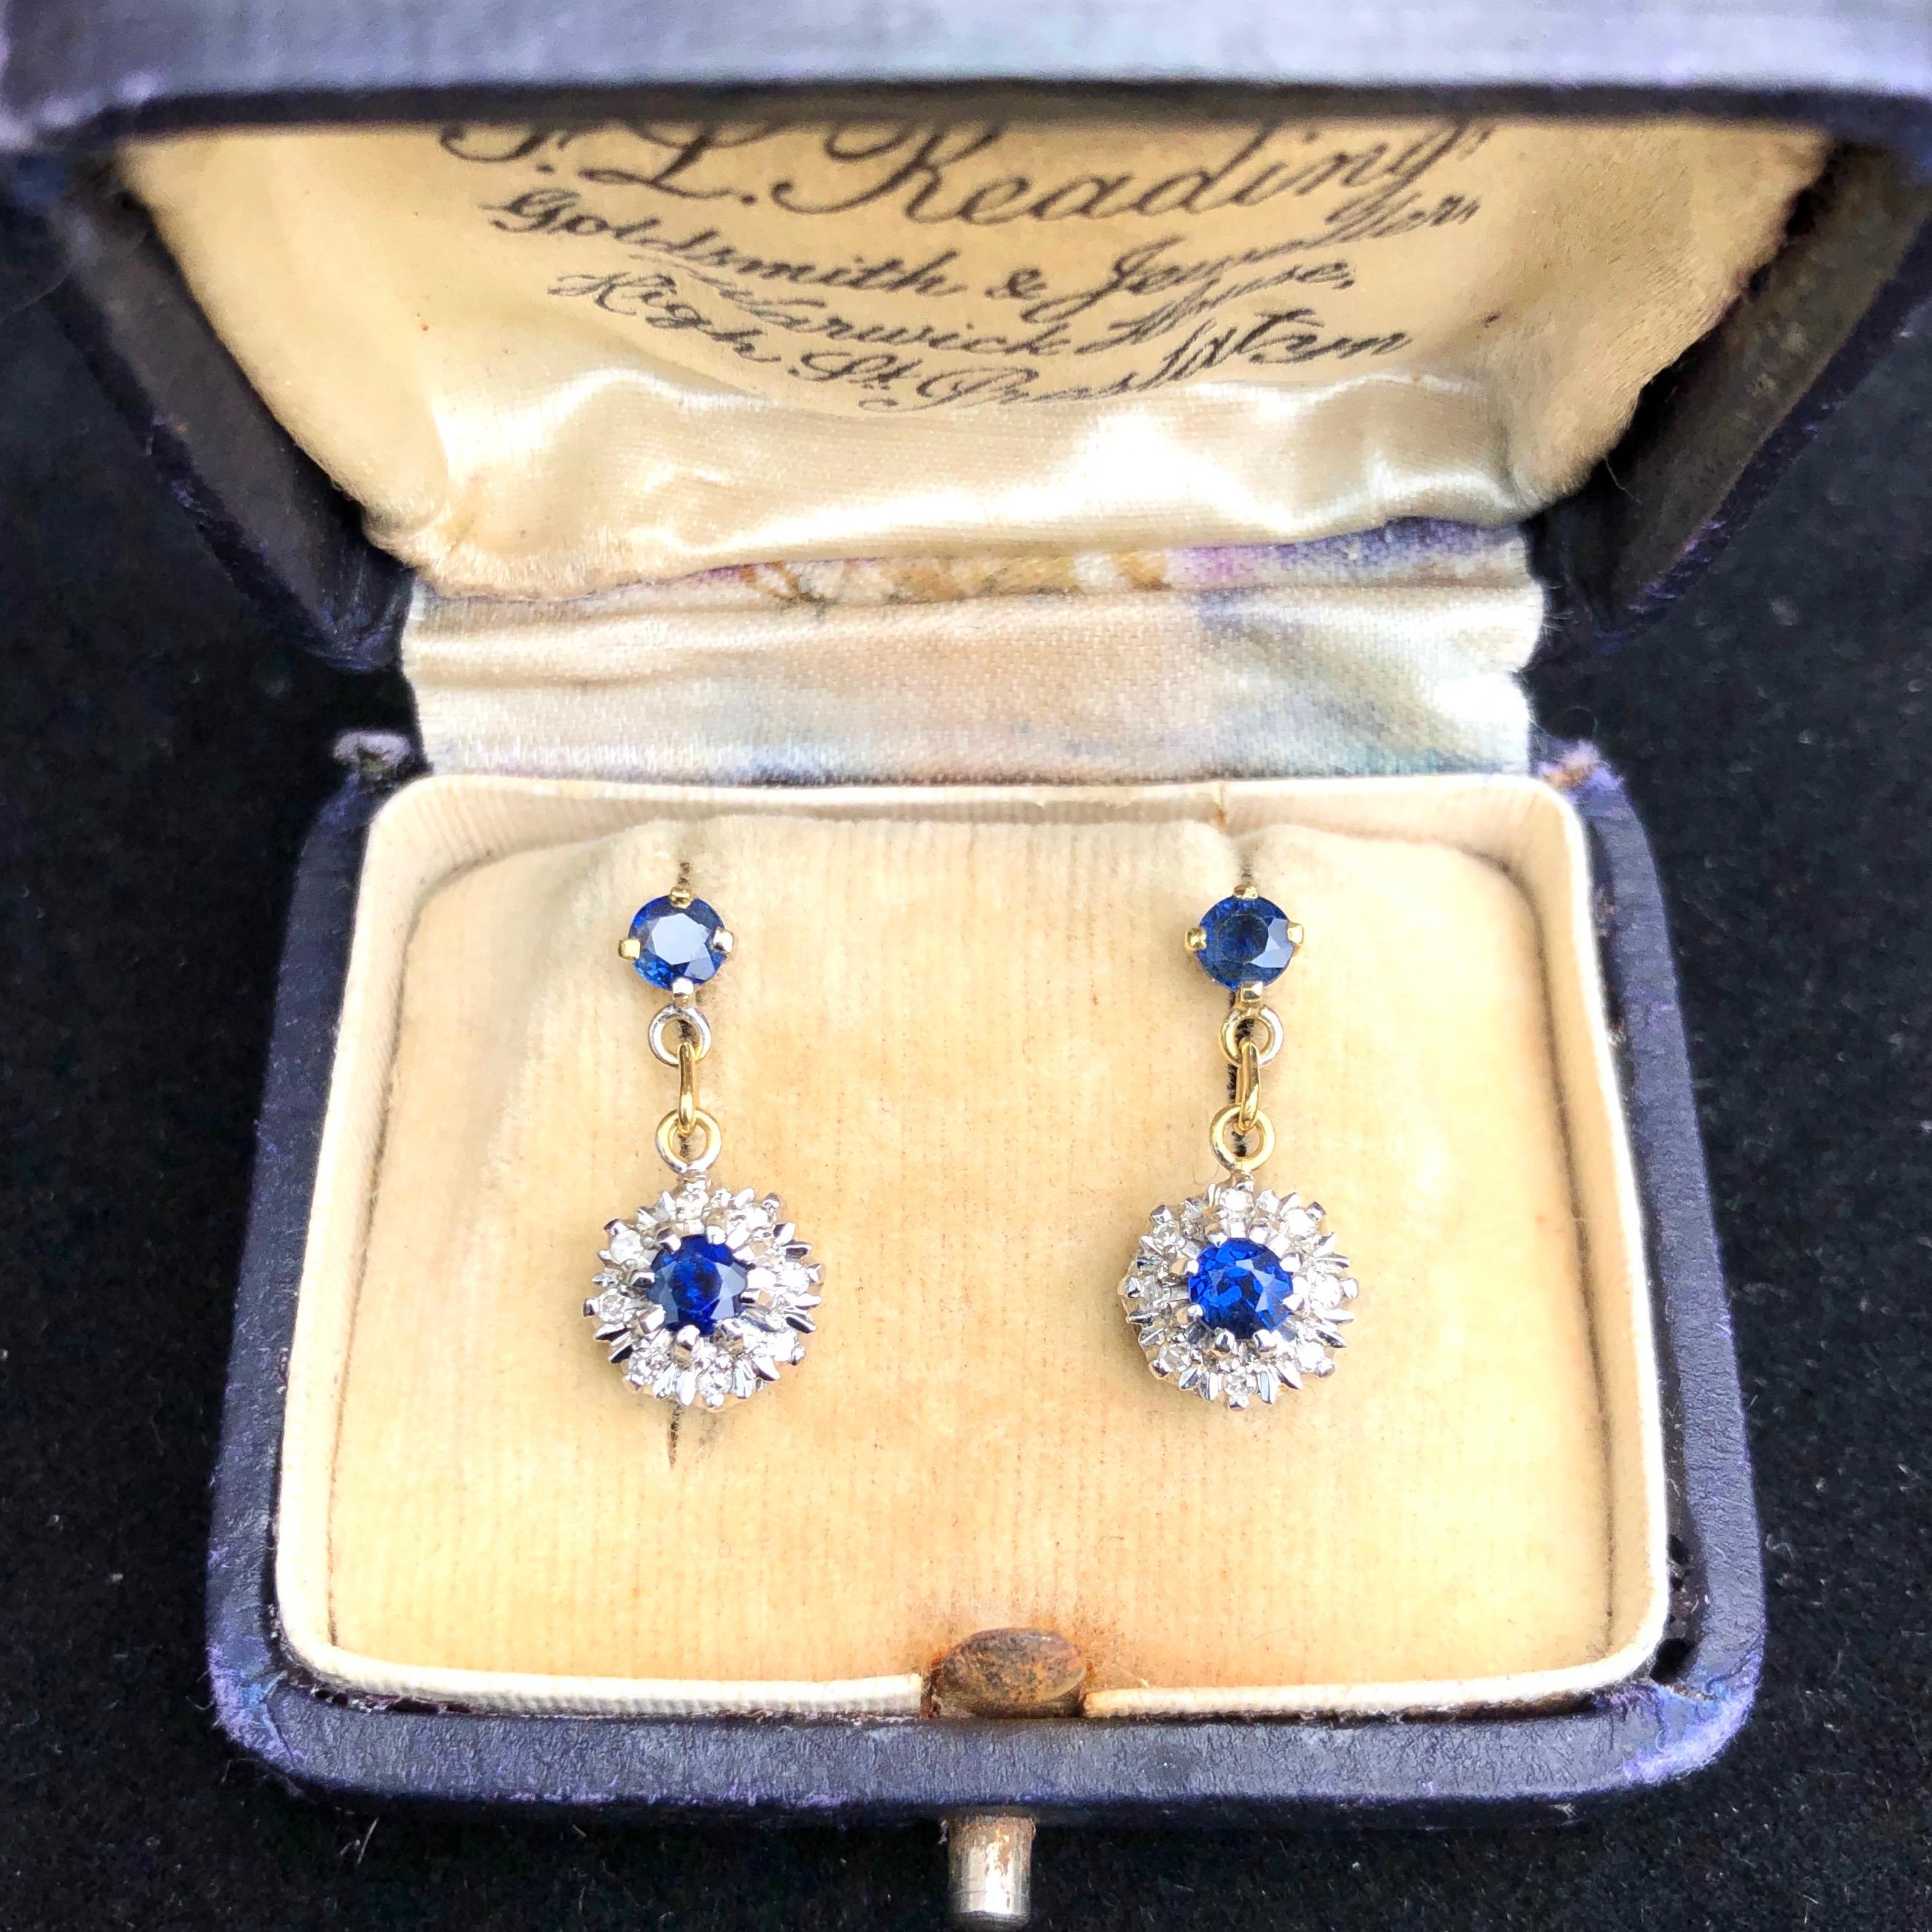 At the centre of each cluster sits a deep delicious blue sapphire and surrounding these gorgeous stones are sparkling diamonds set in detailed settings. The stones are set in platinum and the rest of the earrings are modelled in 18ct gold.

Weight: